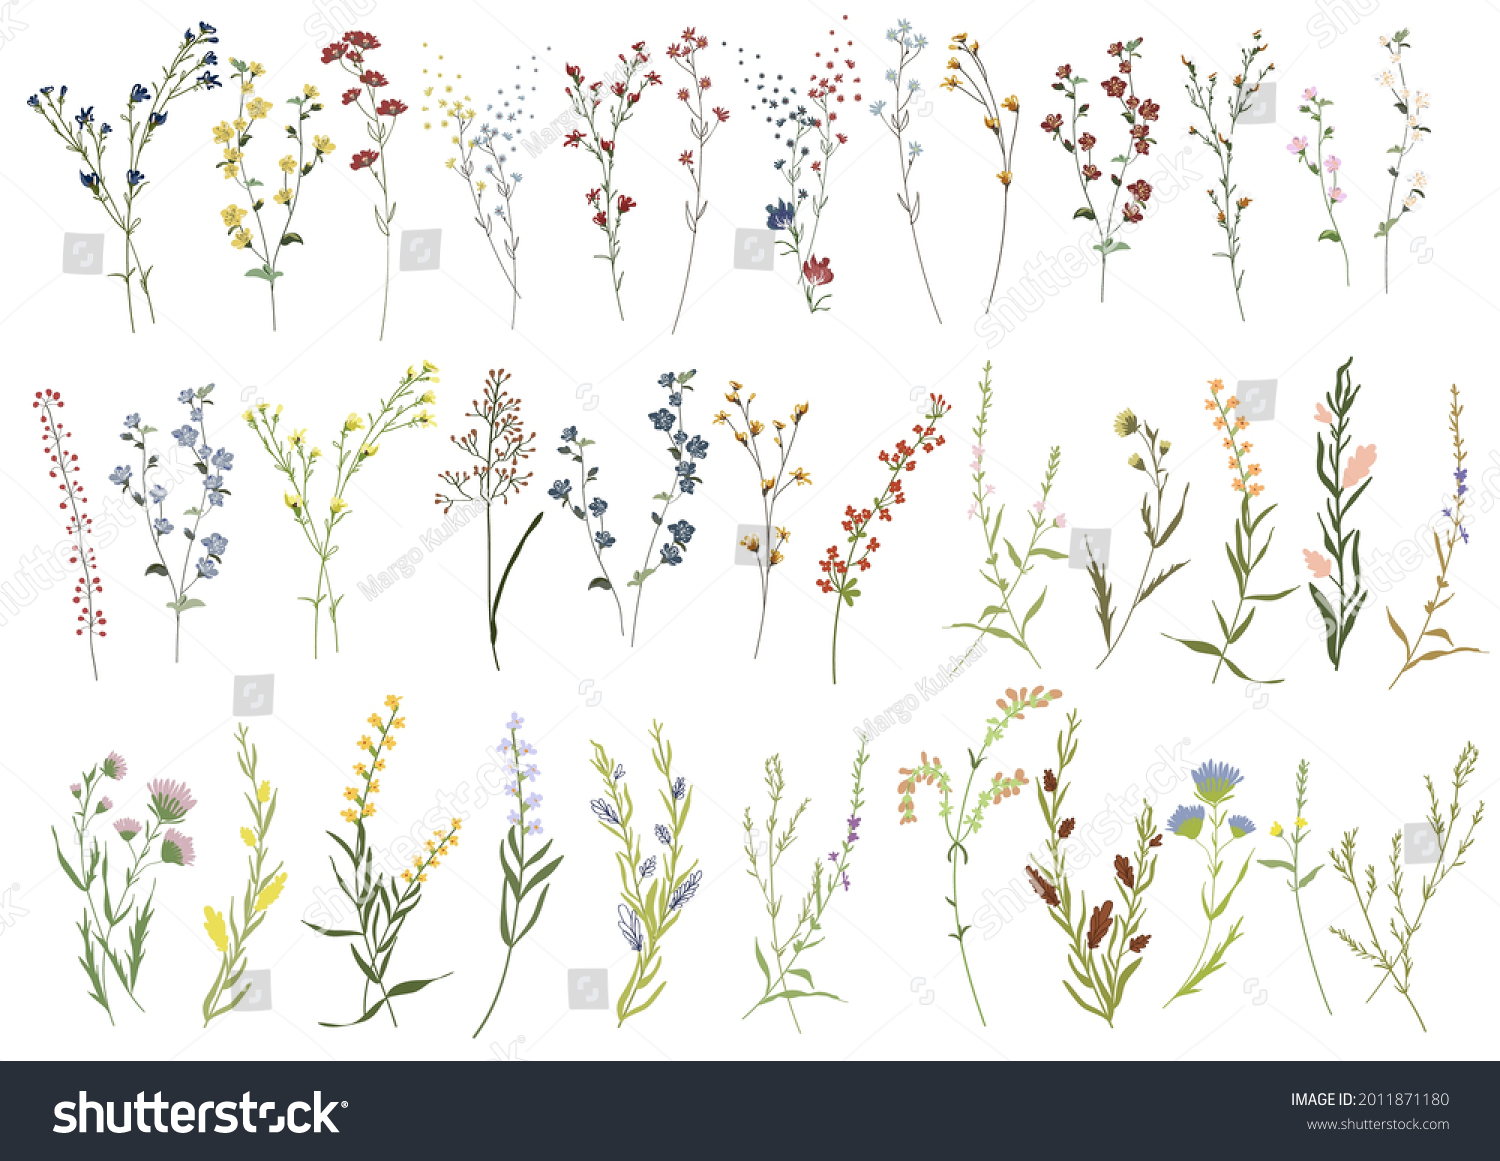 Big set botanic blossom floral elements. Branches, leaves, herbs, wild plants, flowers. Garden, meadow, field collection leaf, foliage, branches. Bloom vector illustration isolated on white background #2011871180